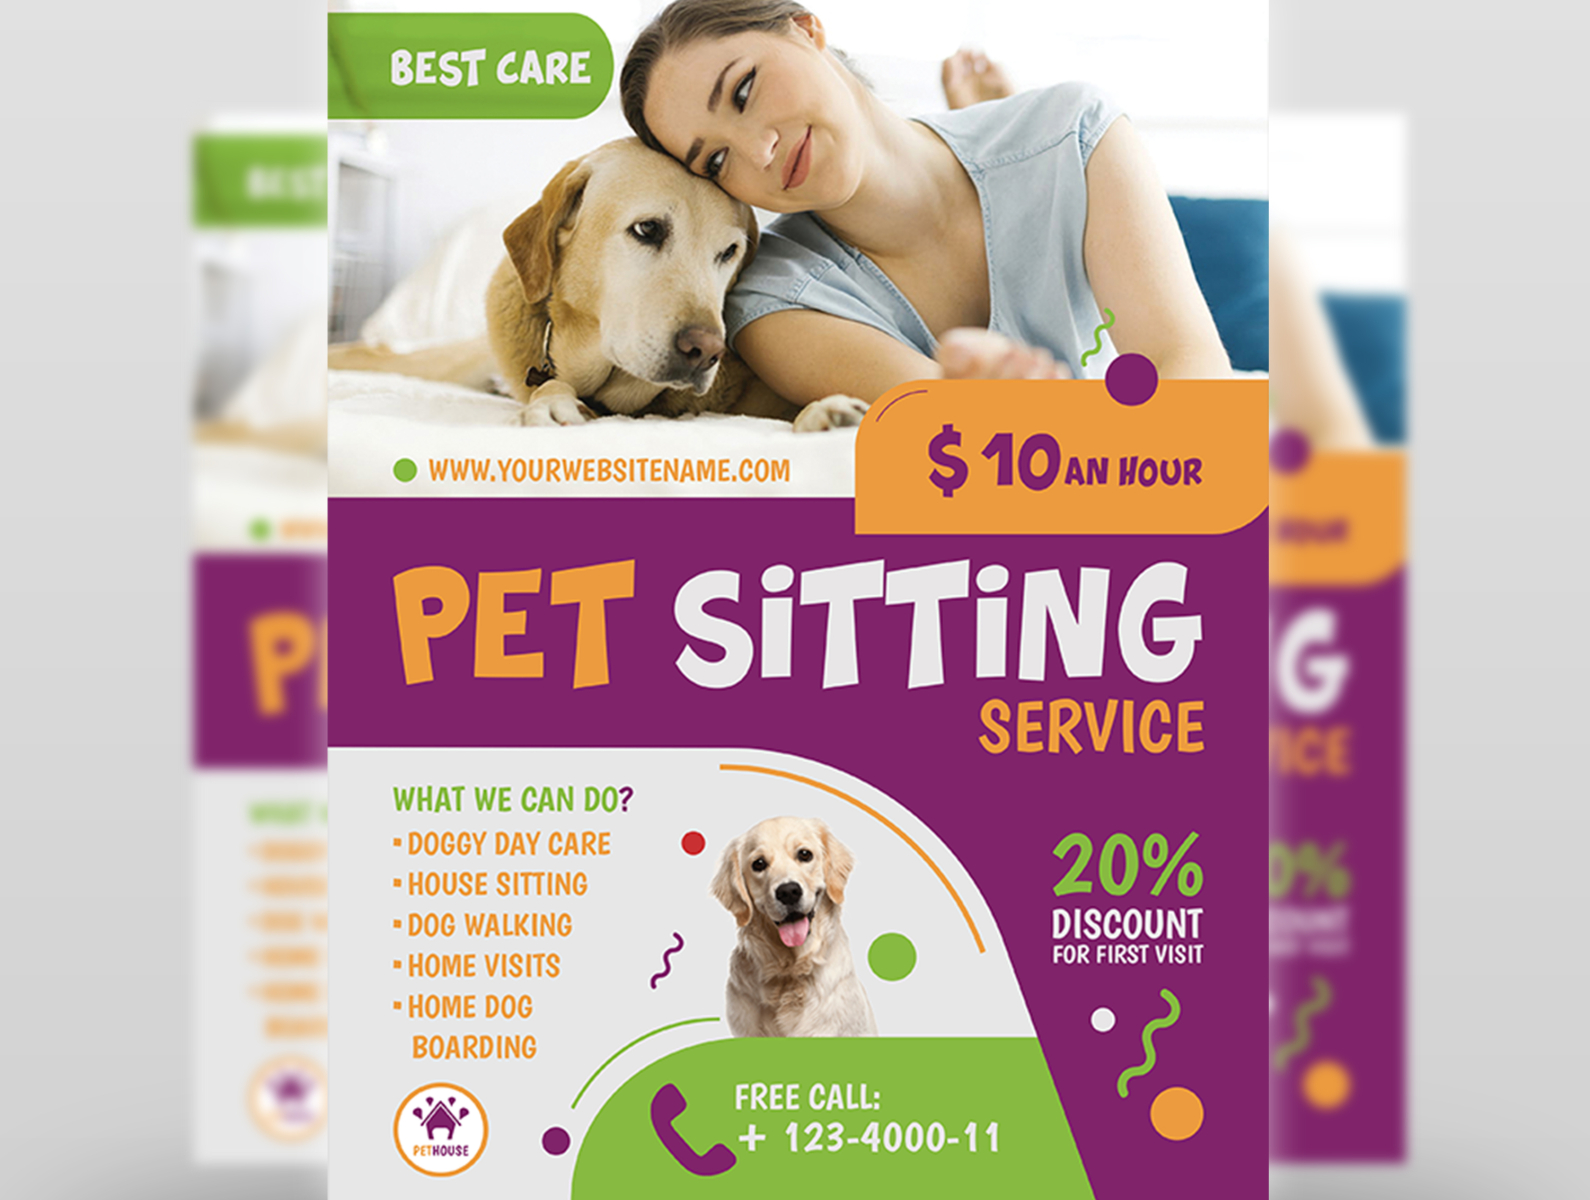 Pet Sitting Service Flyer Template by OWPictures on Dribbble Intended For Dog Walking Flyer Template Free